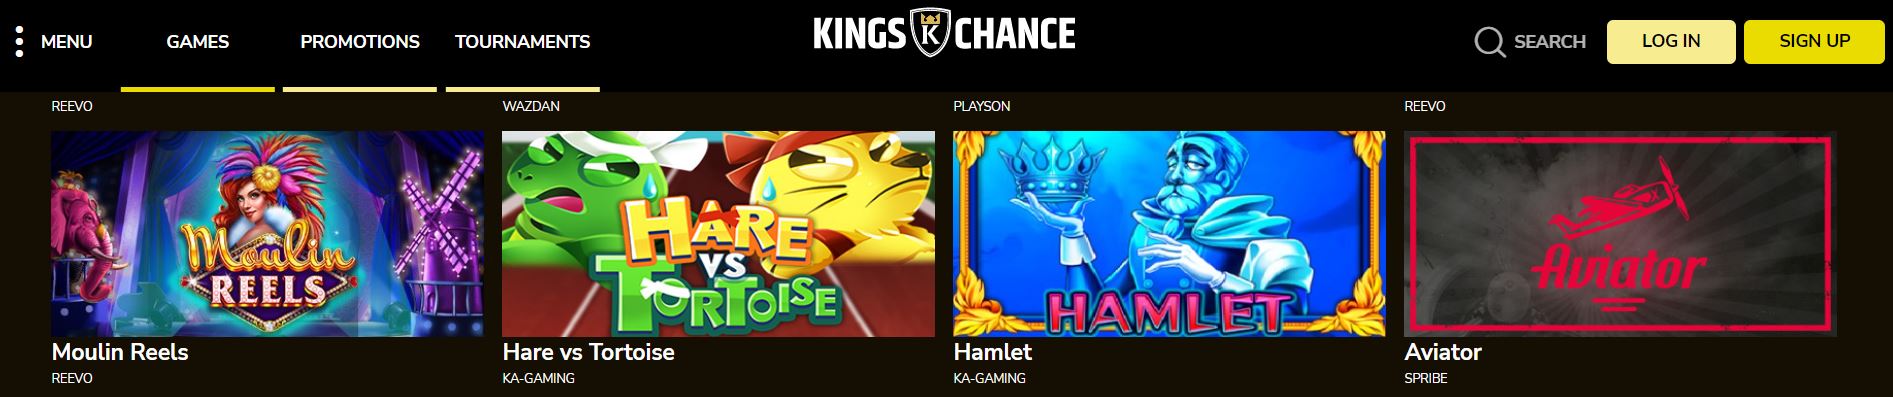 Kings Chance Jeux Fusee qui Decolle Casino Canada